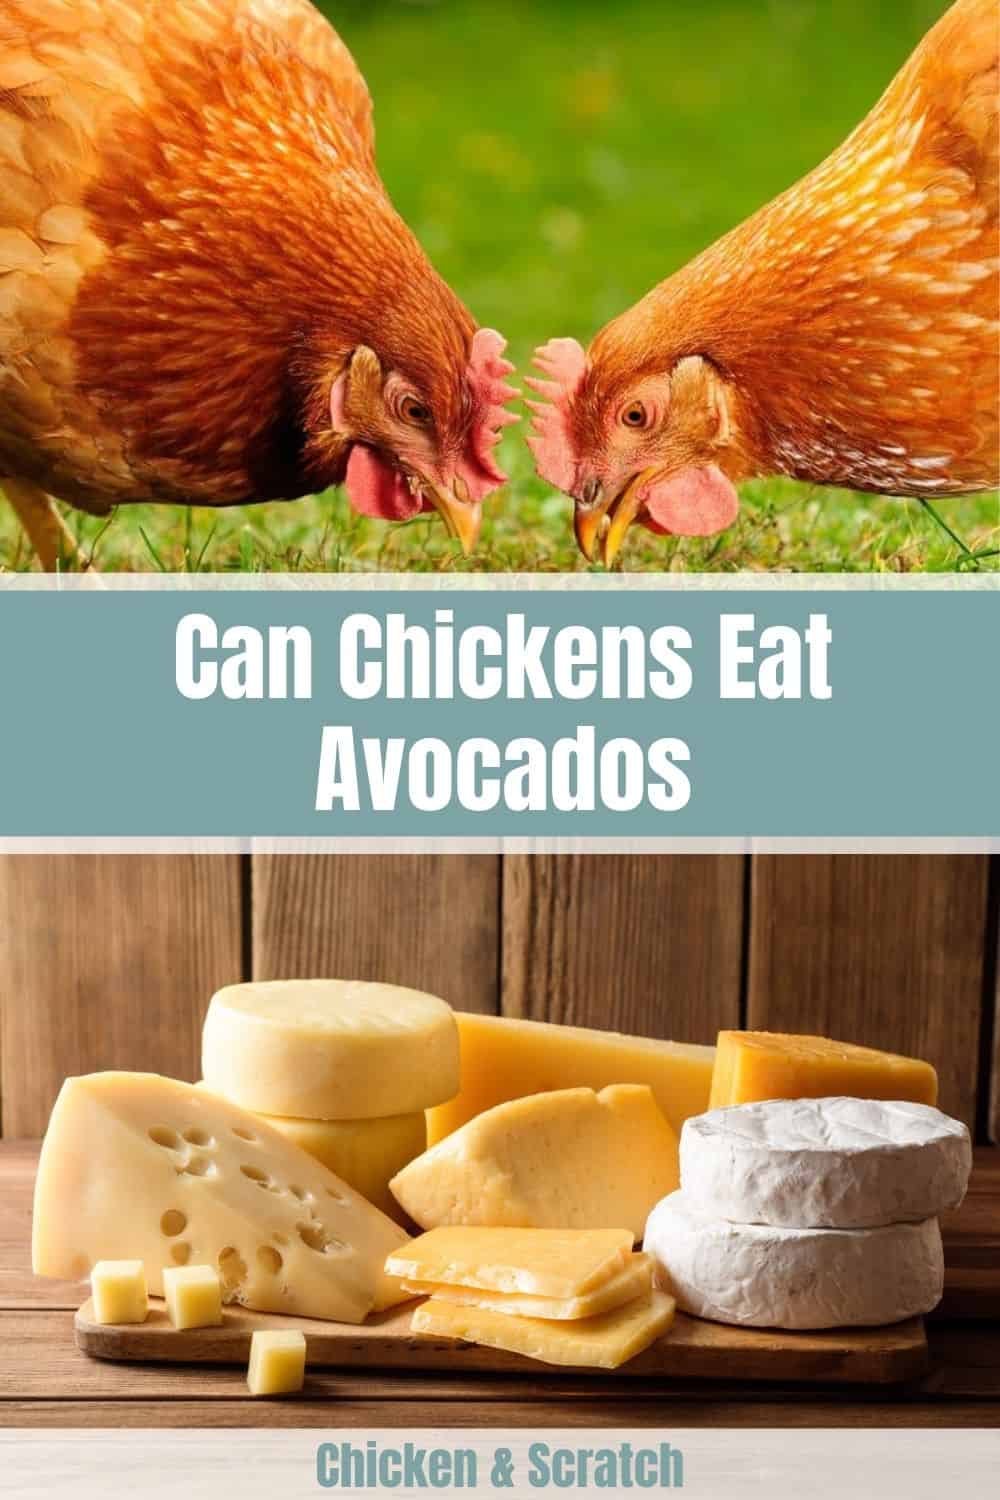 can chickens have cheese